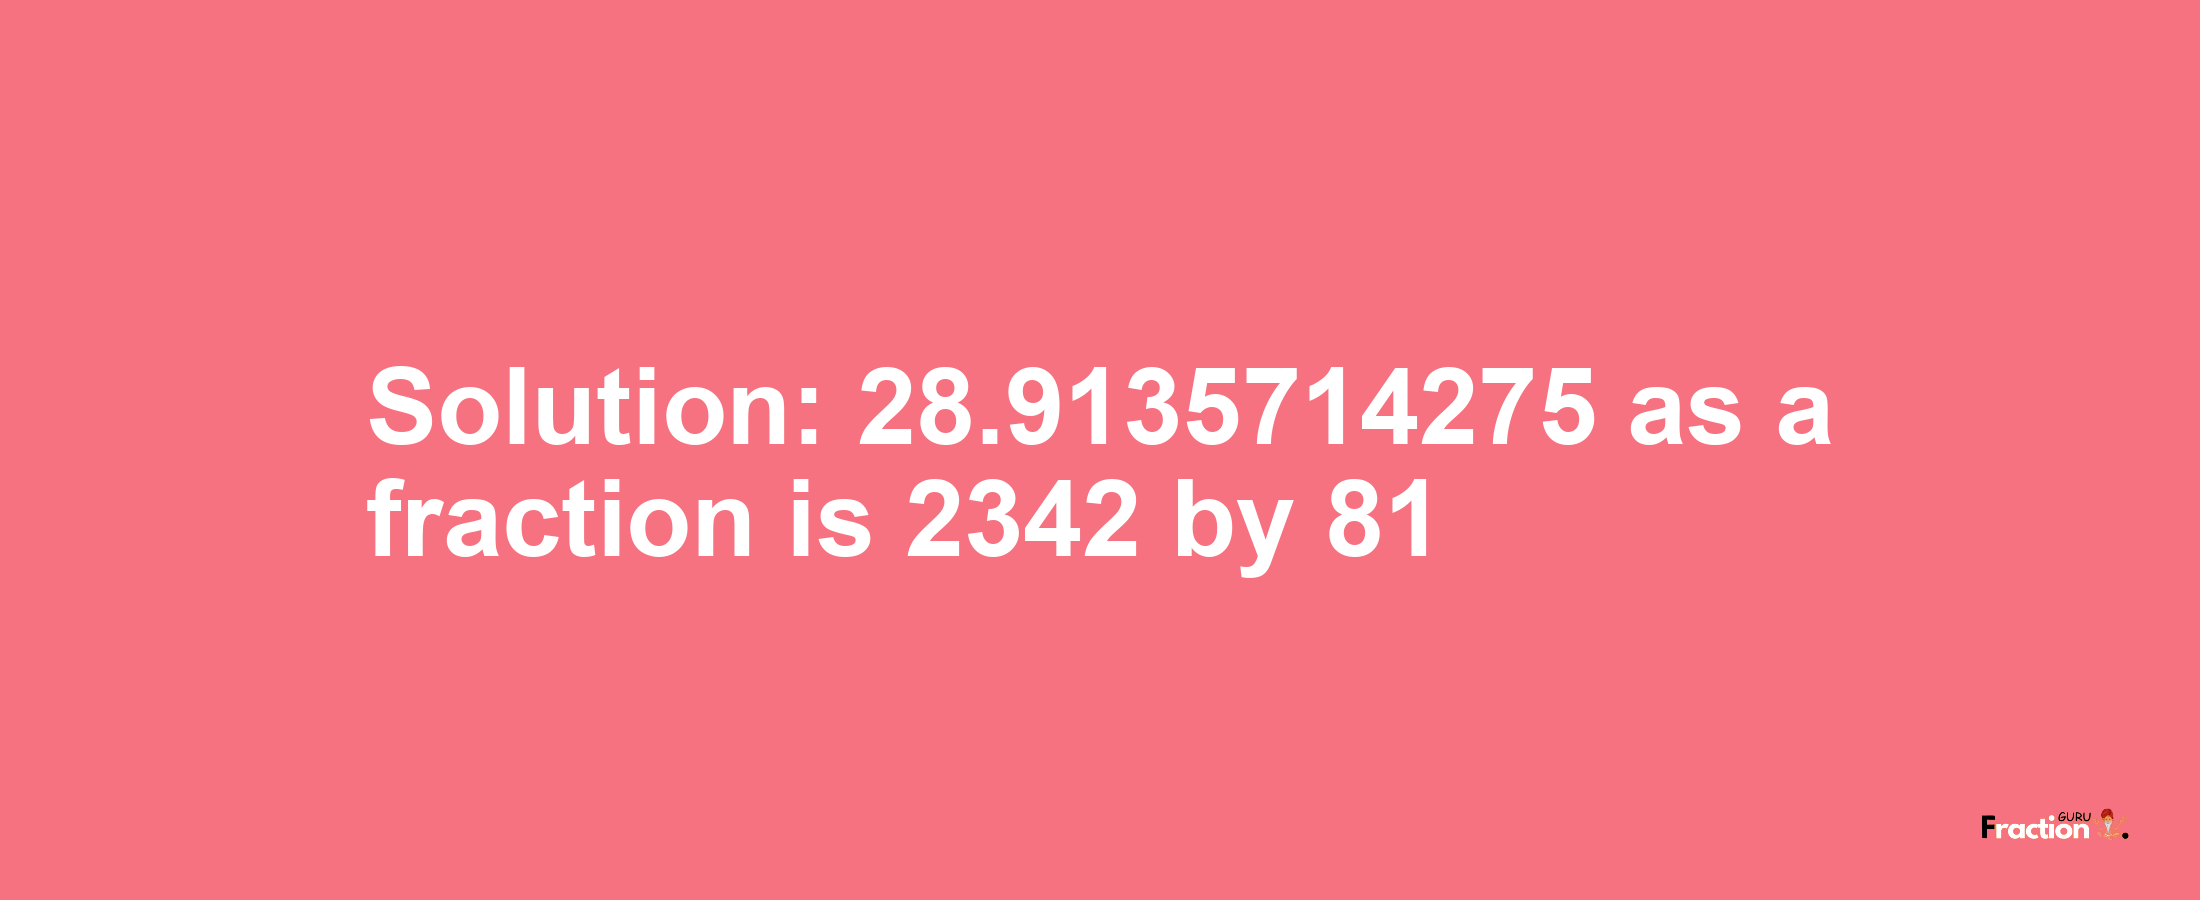 Solution:28.9135714275 as a fraction is 2342/81